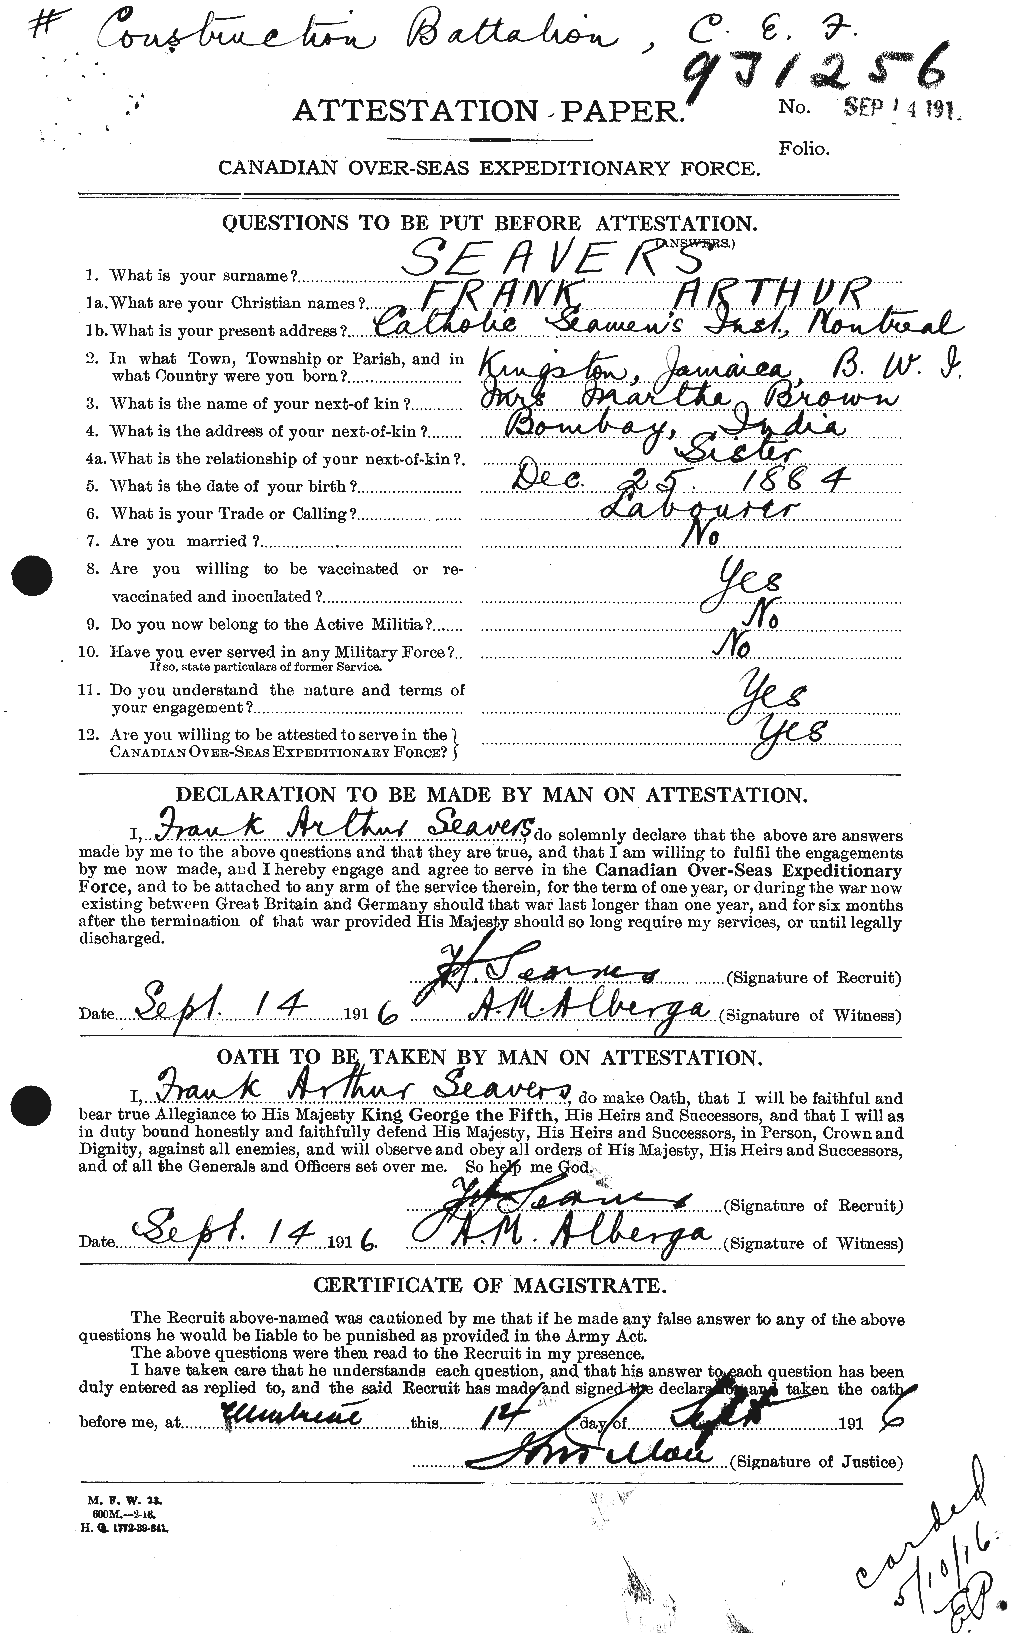 Personnel Records of the First World War - CEF 085953a